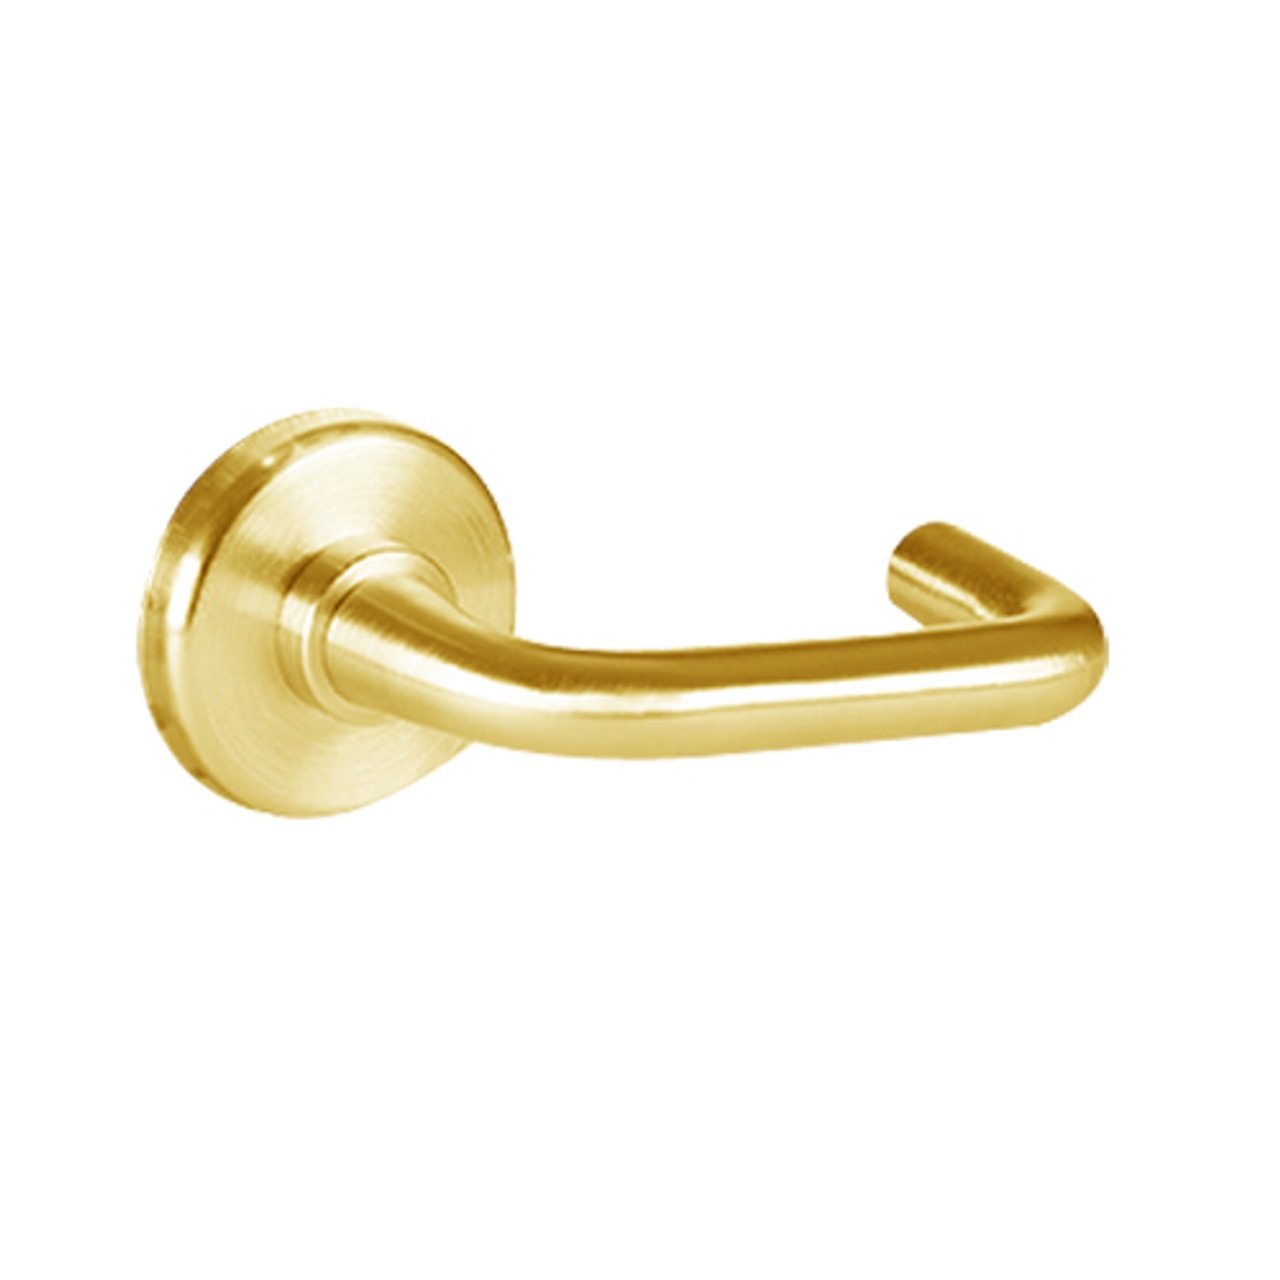 40HTKOS13R605 Best 40H Series Trim Kits Outside Lever Only with Solid Tube-Return Trim Style in Bright Brass